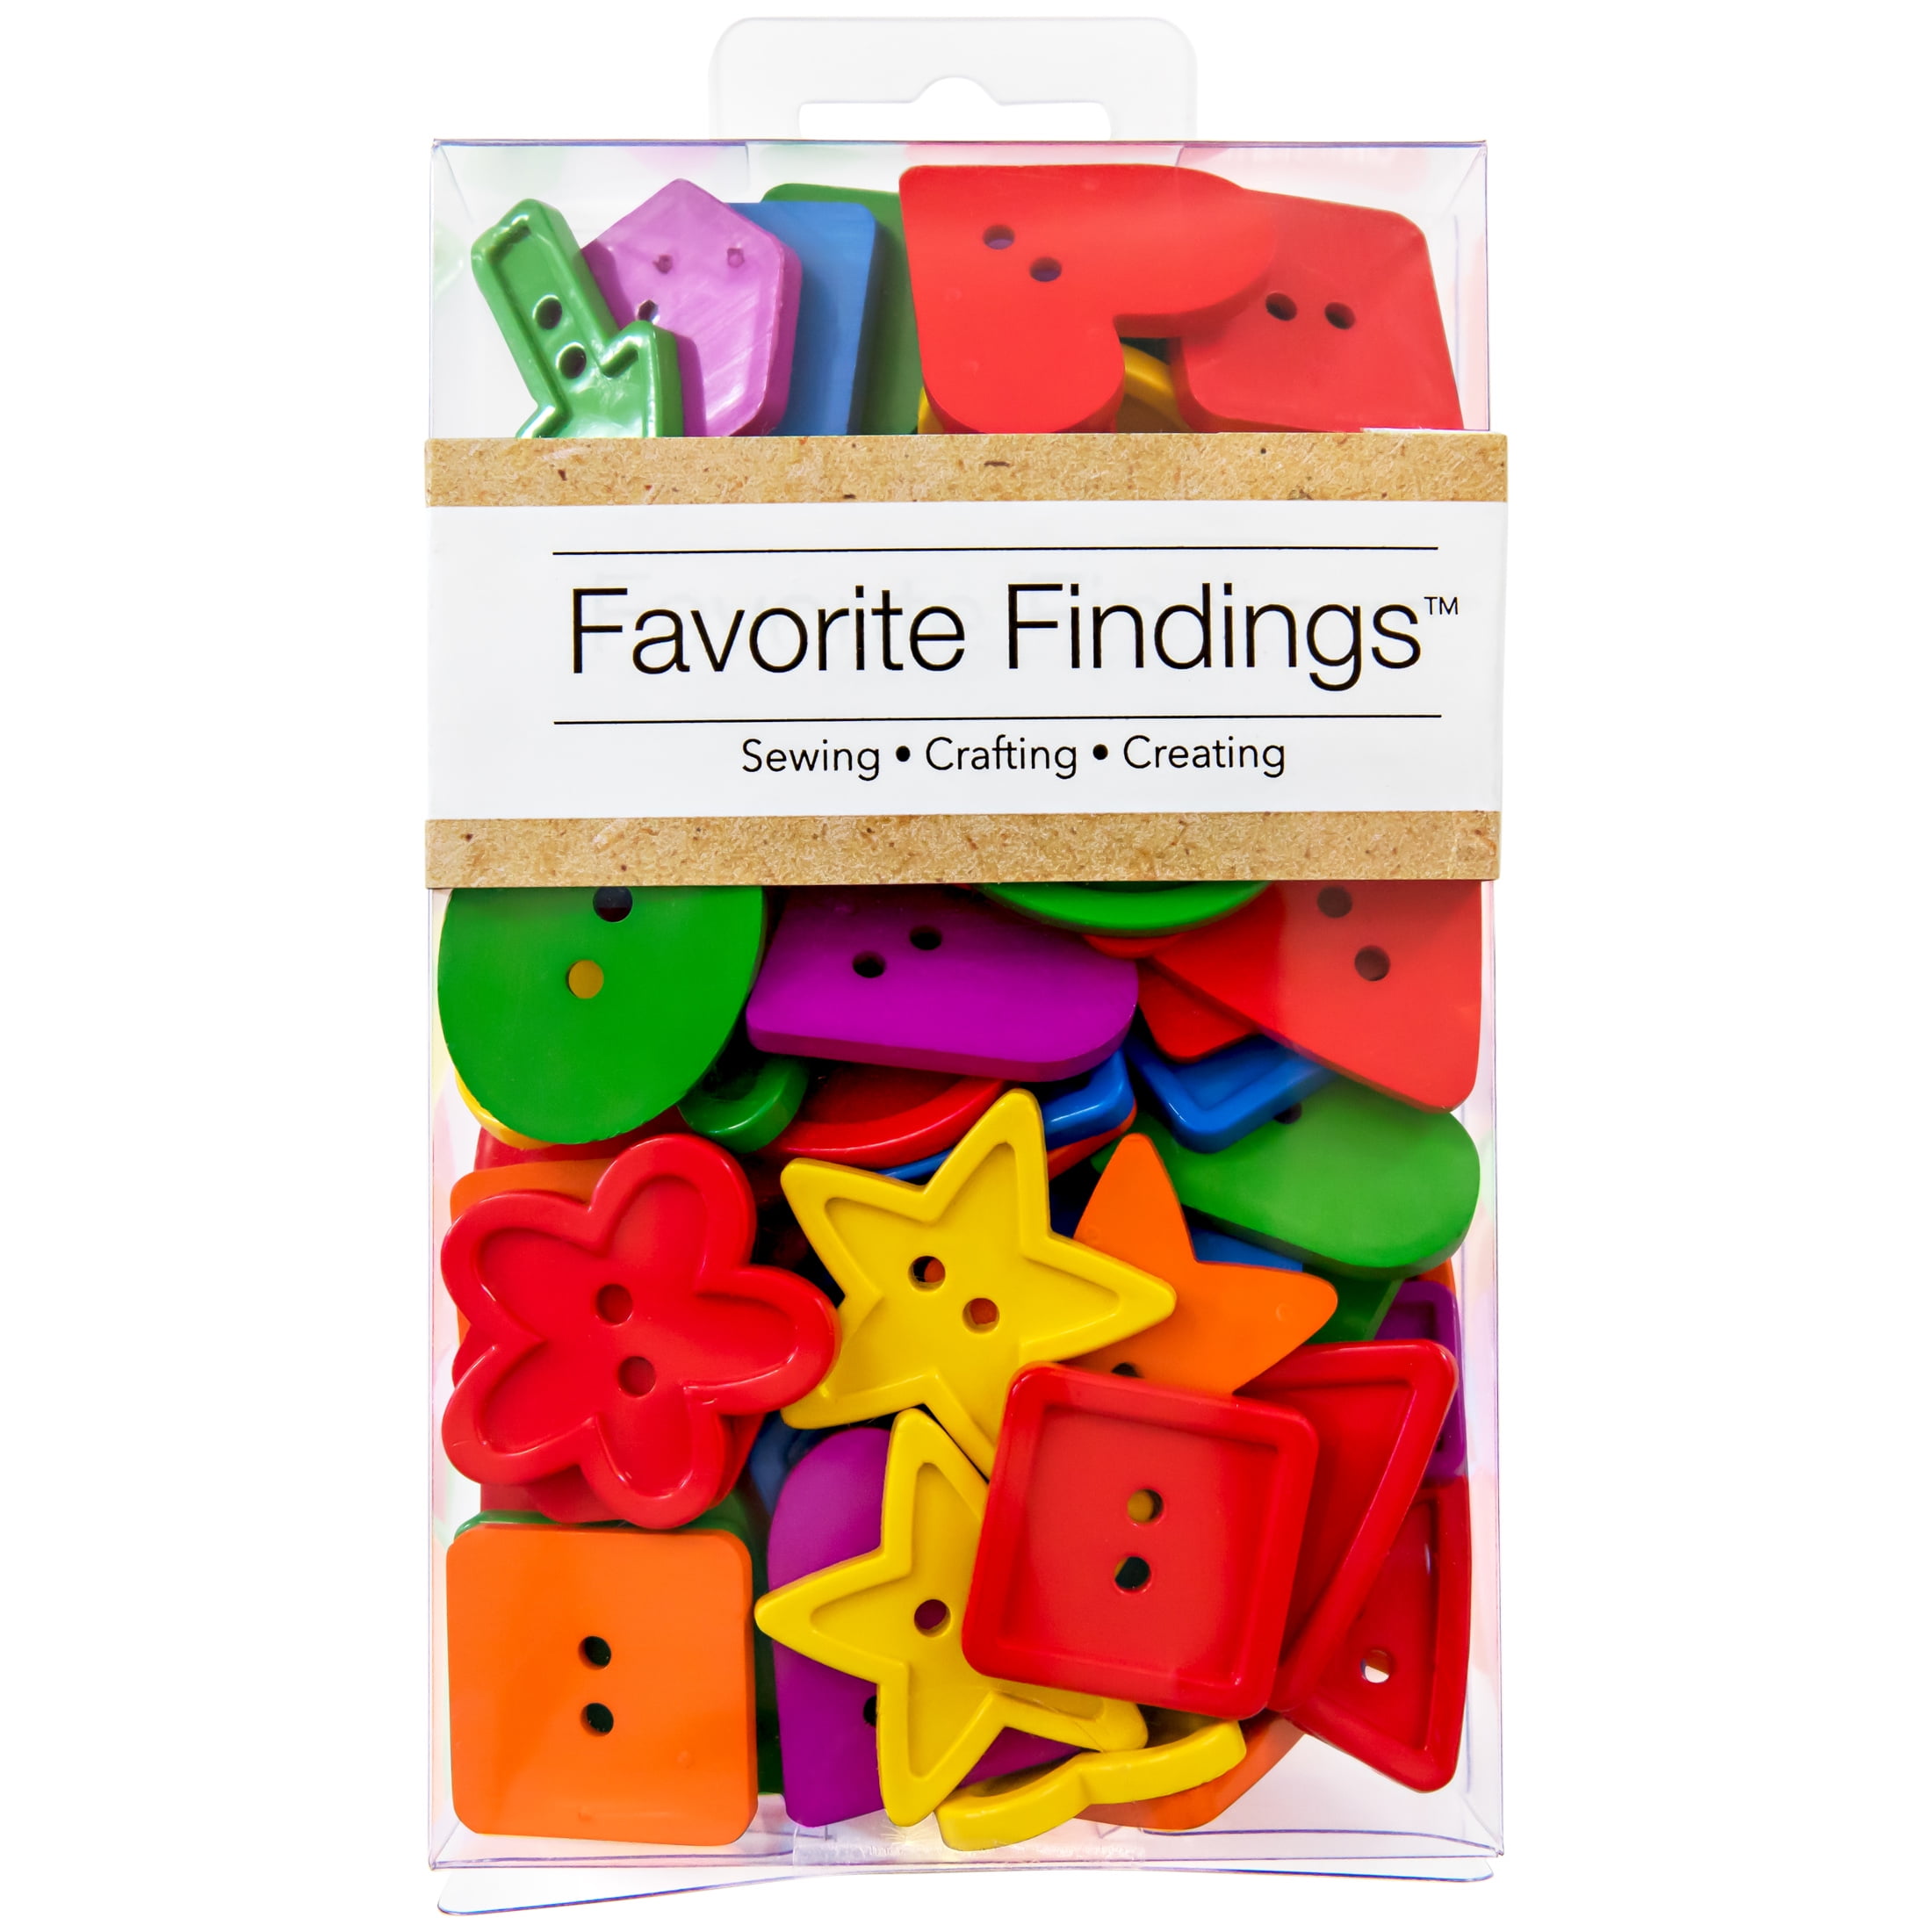 Favorite Findings Country Darks Assorted Sew Thru Buttons, 130 Pieces